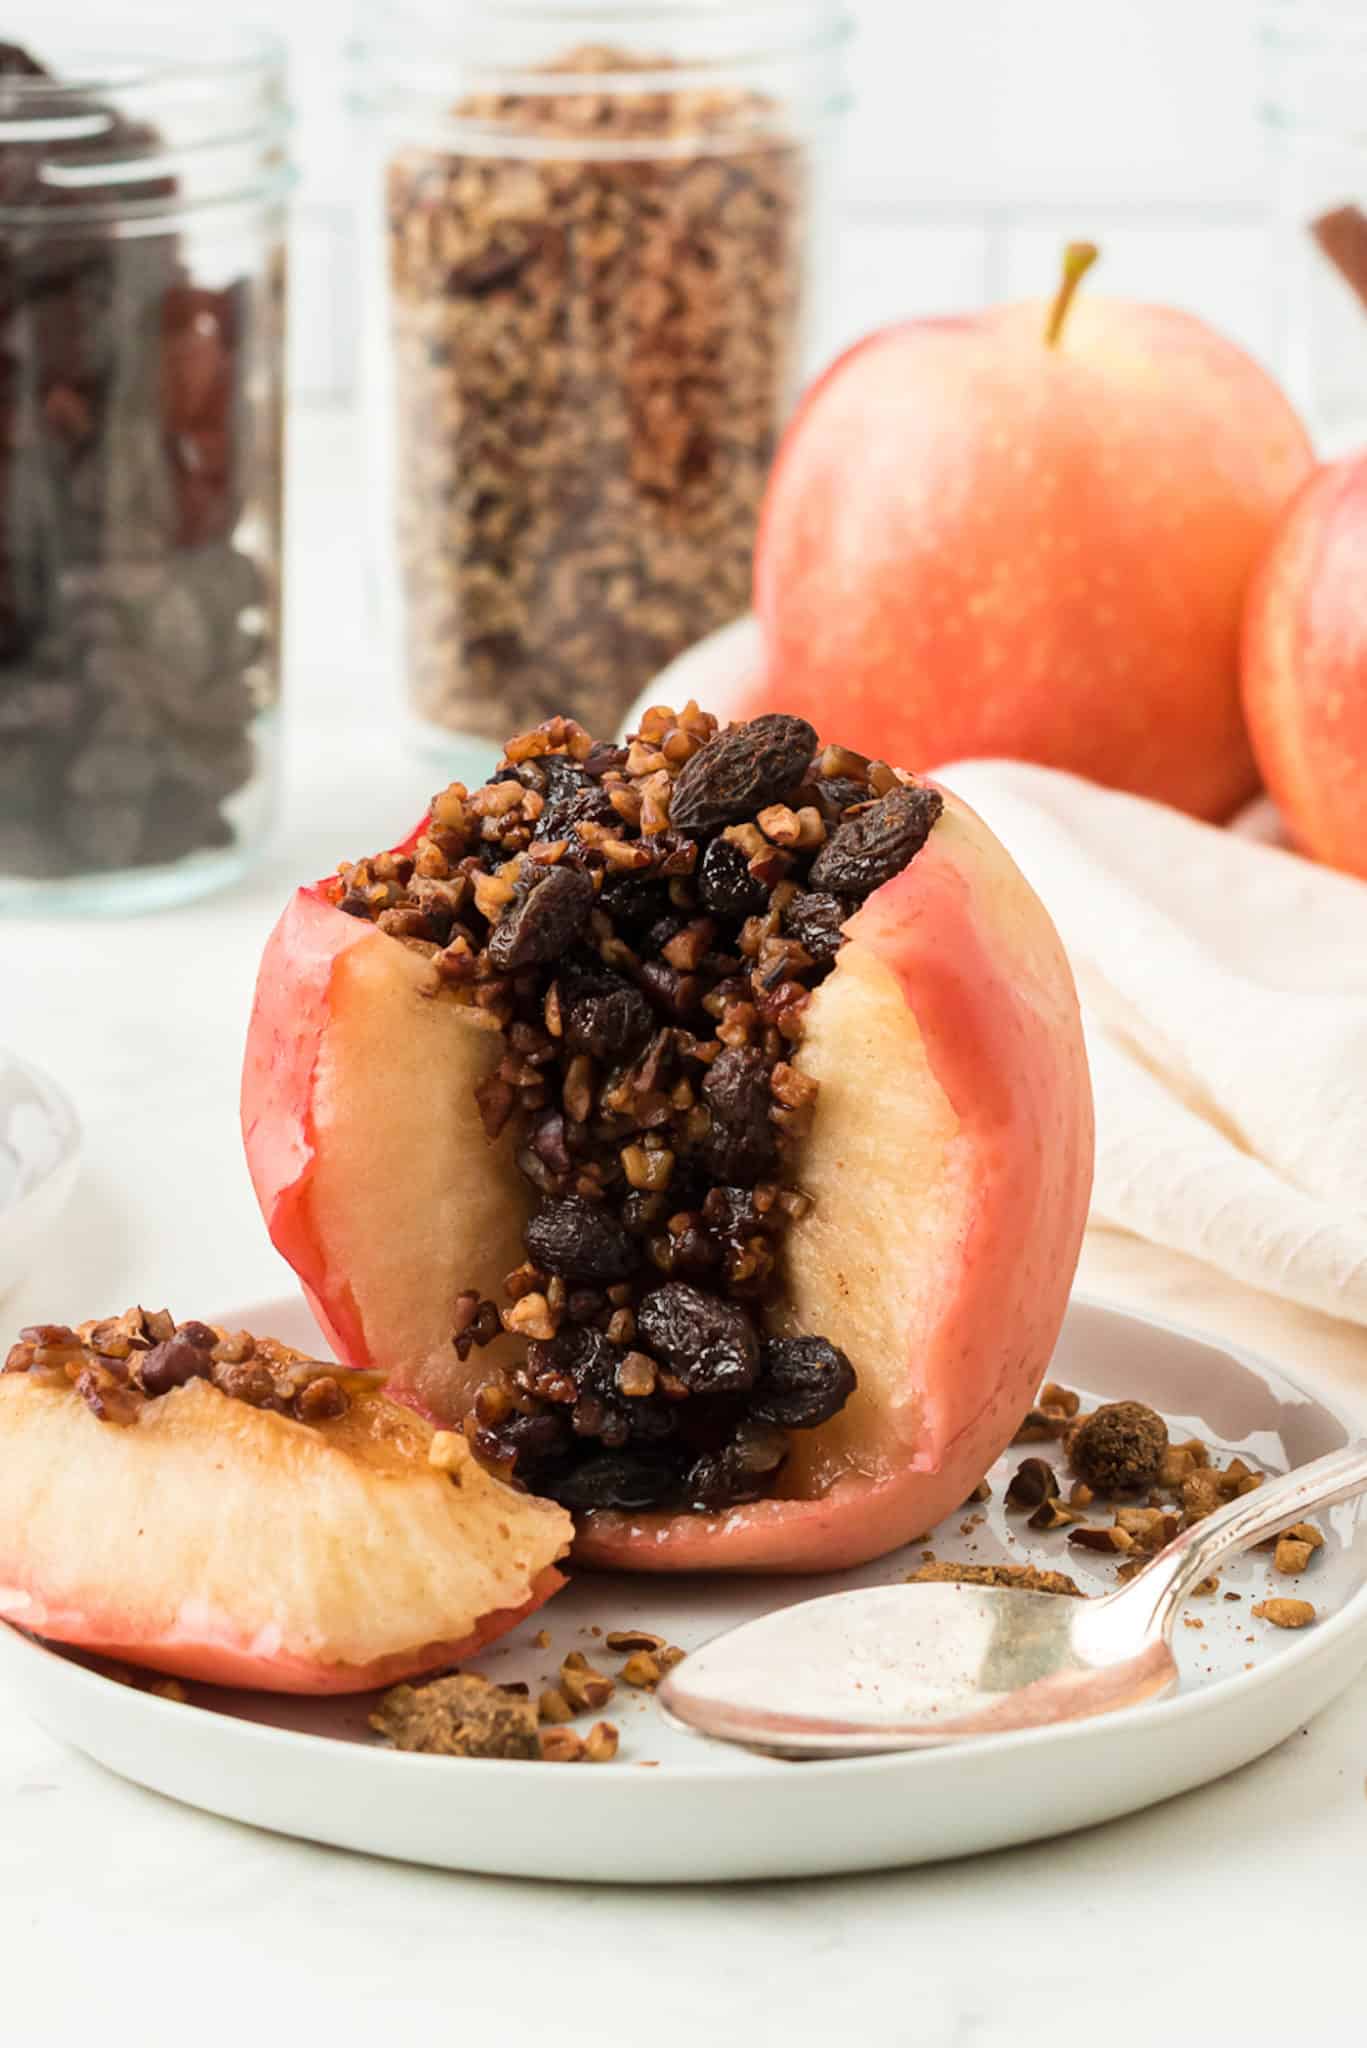 baked apple with raisin filling